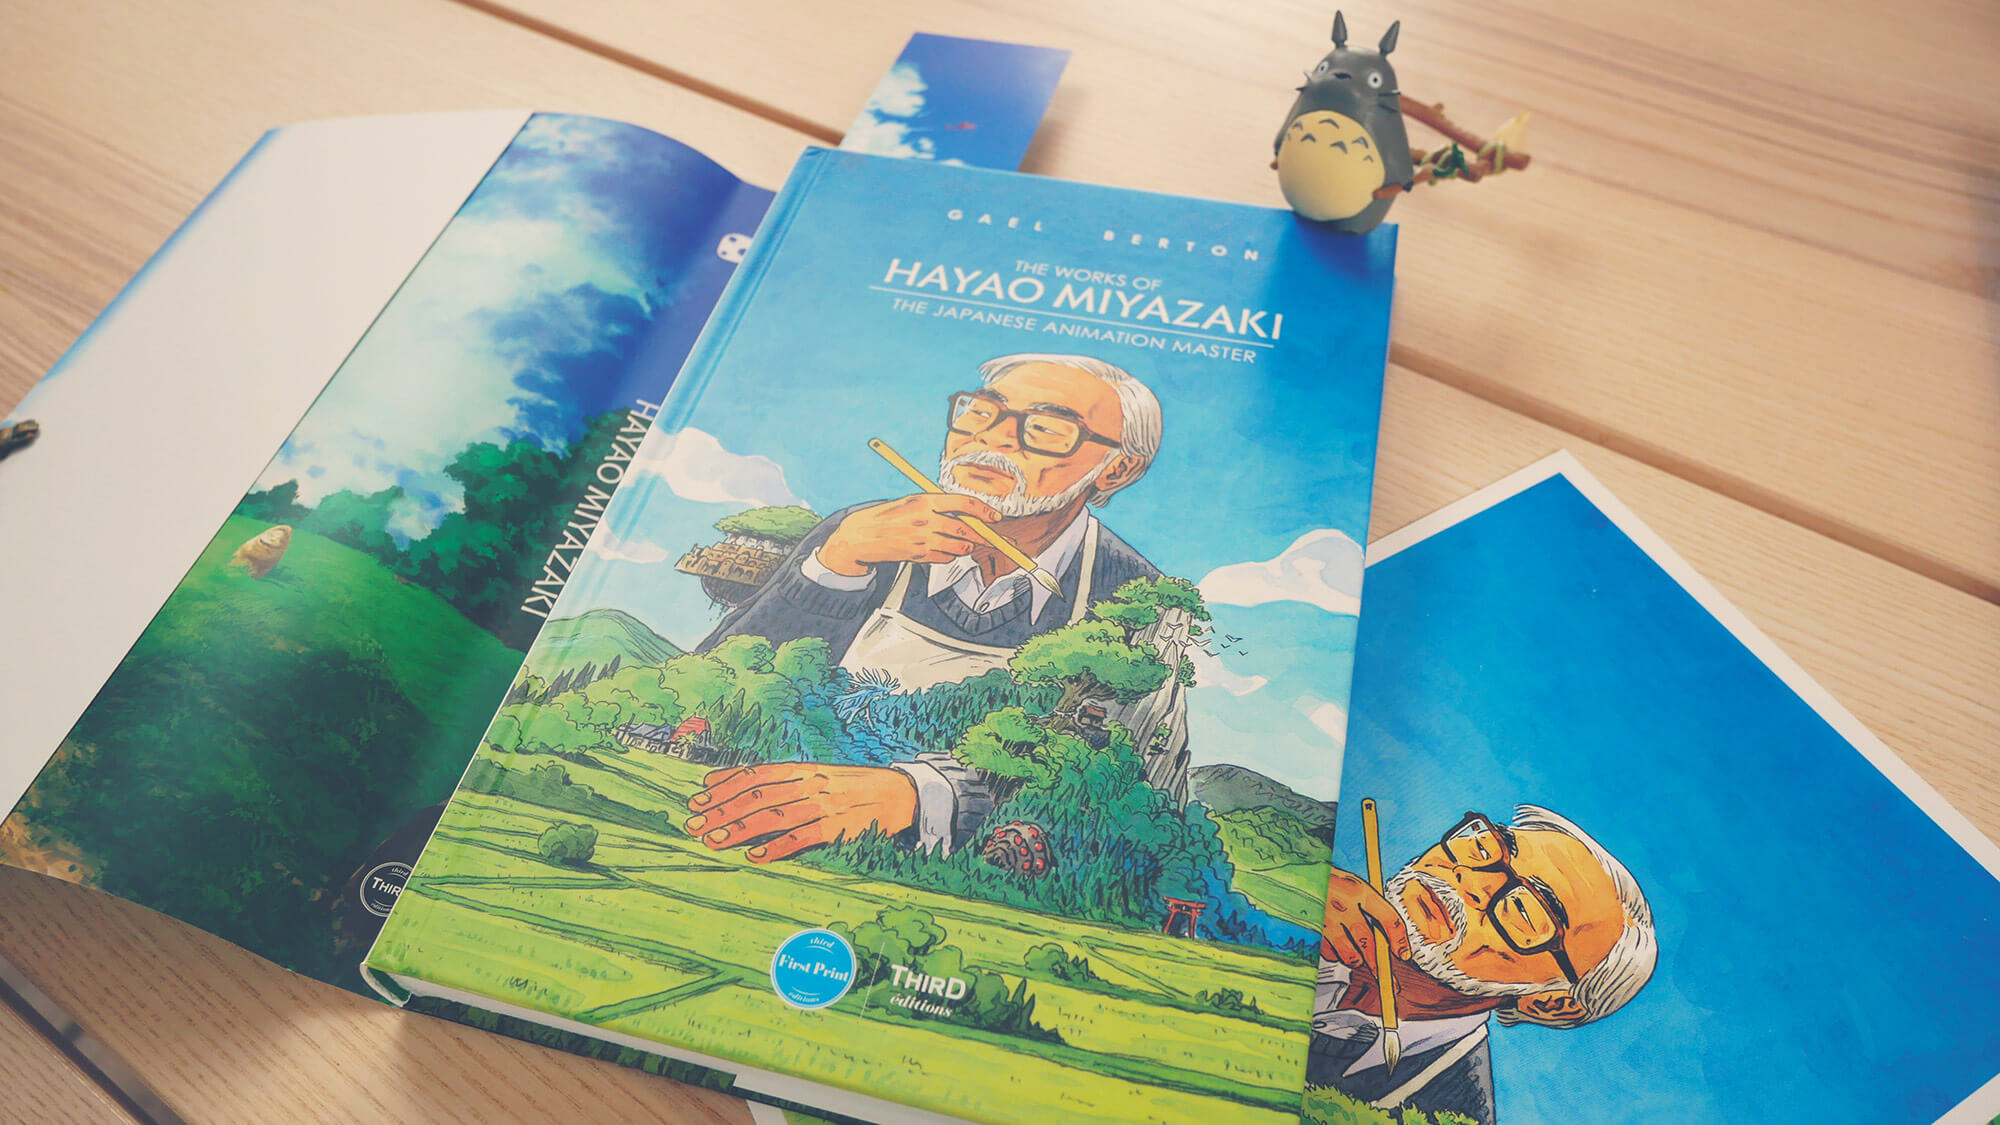 The Works of Hayao Miyazaki – A Study by Gael - The Master of Japanese  Animation - Third Editions